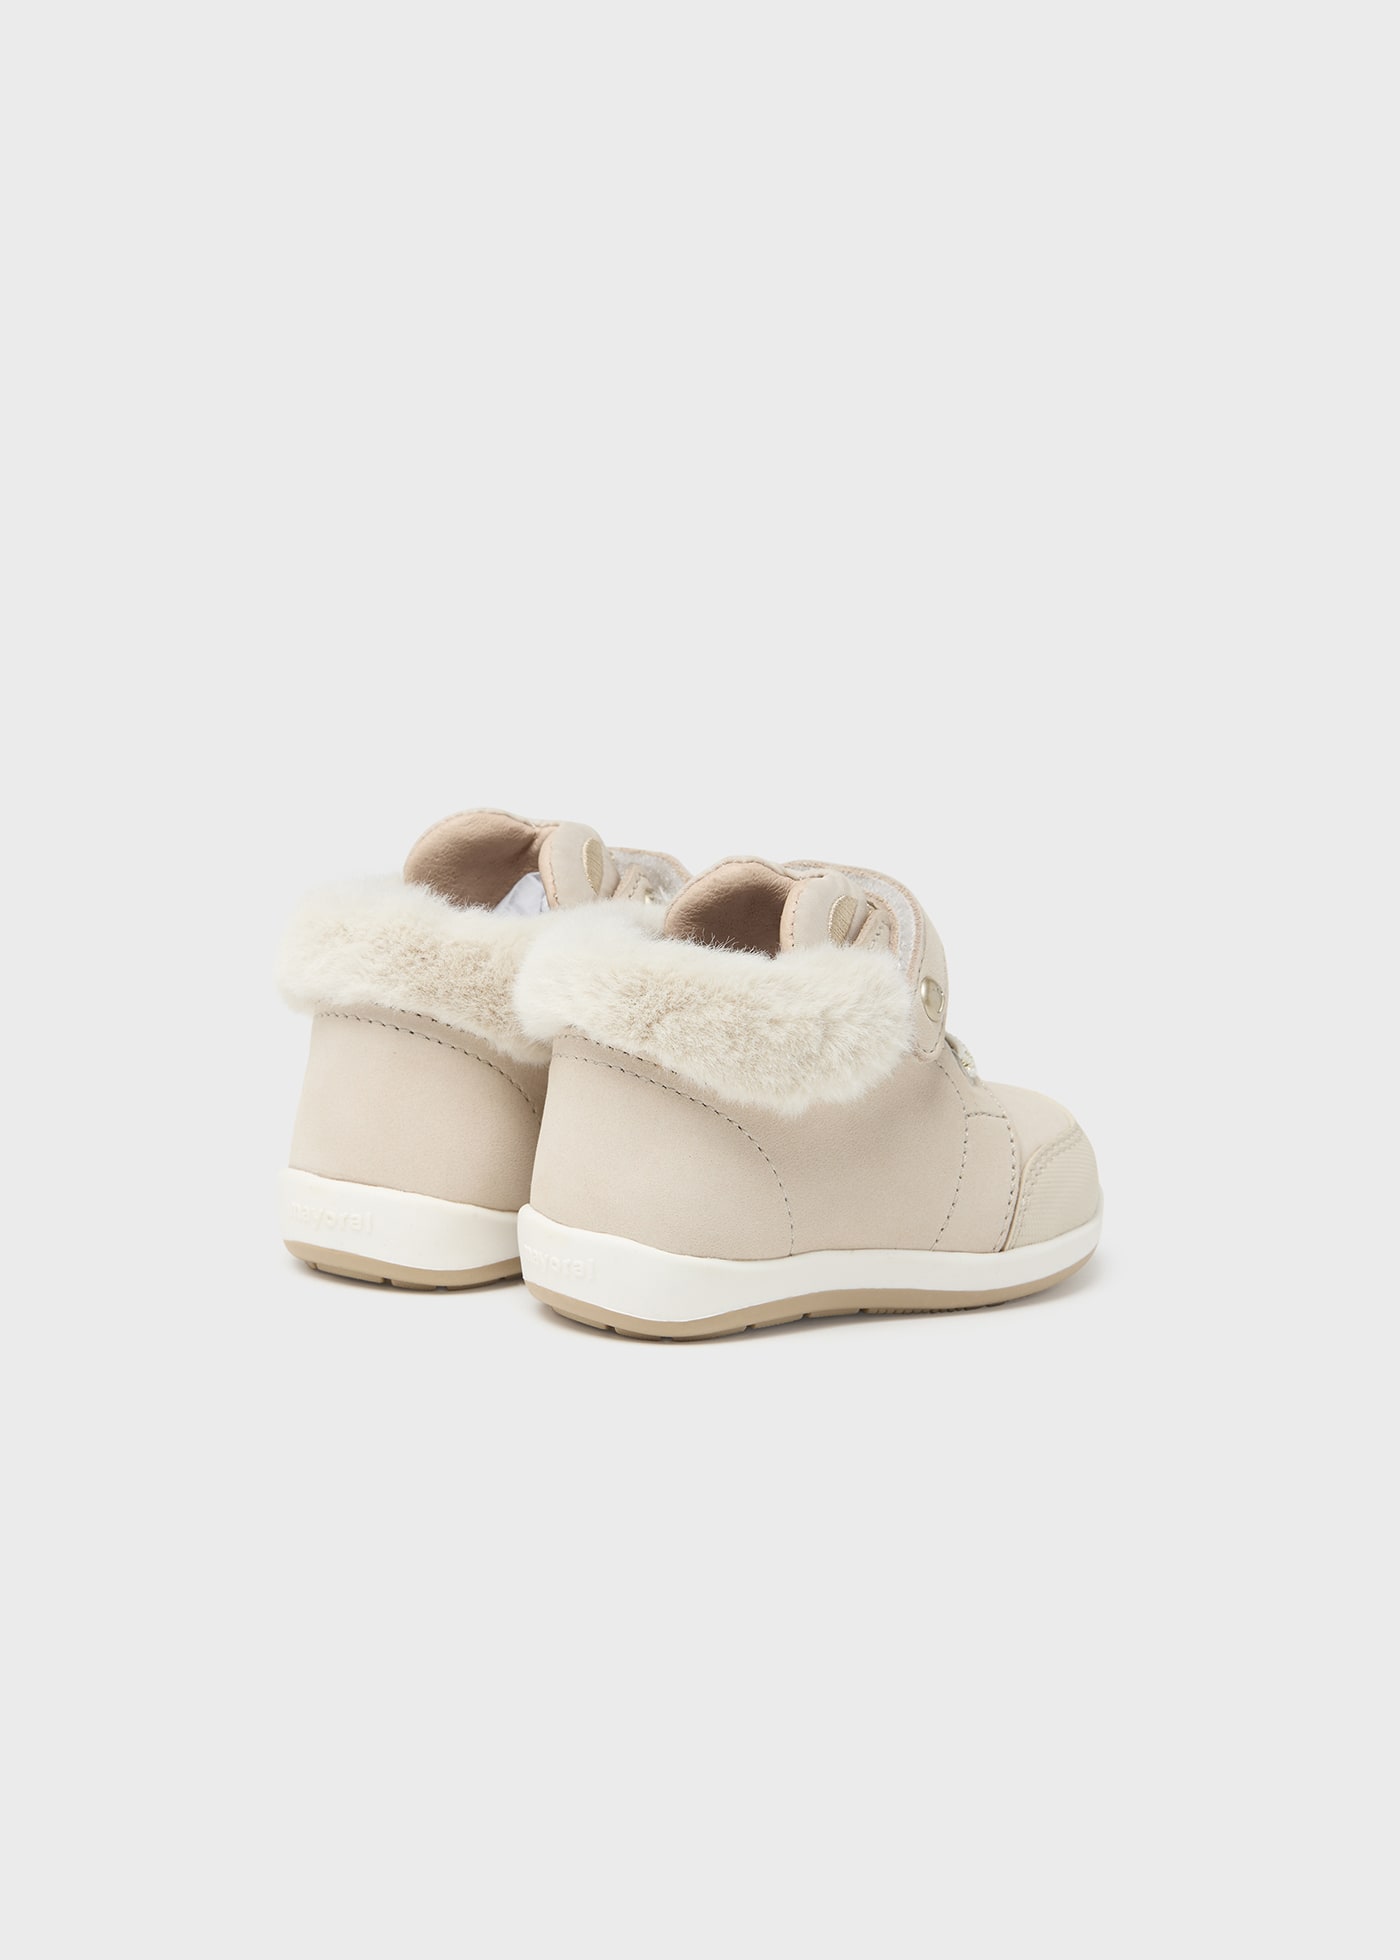 Baby fur ankle boots sustainable leather